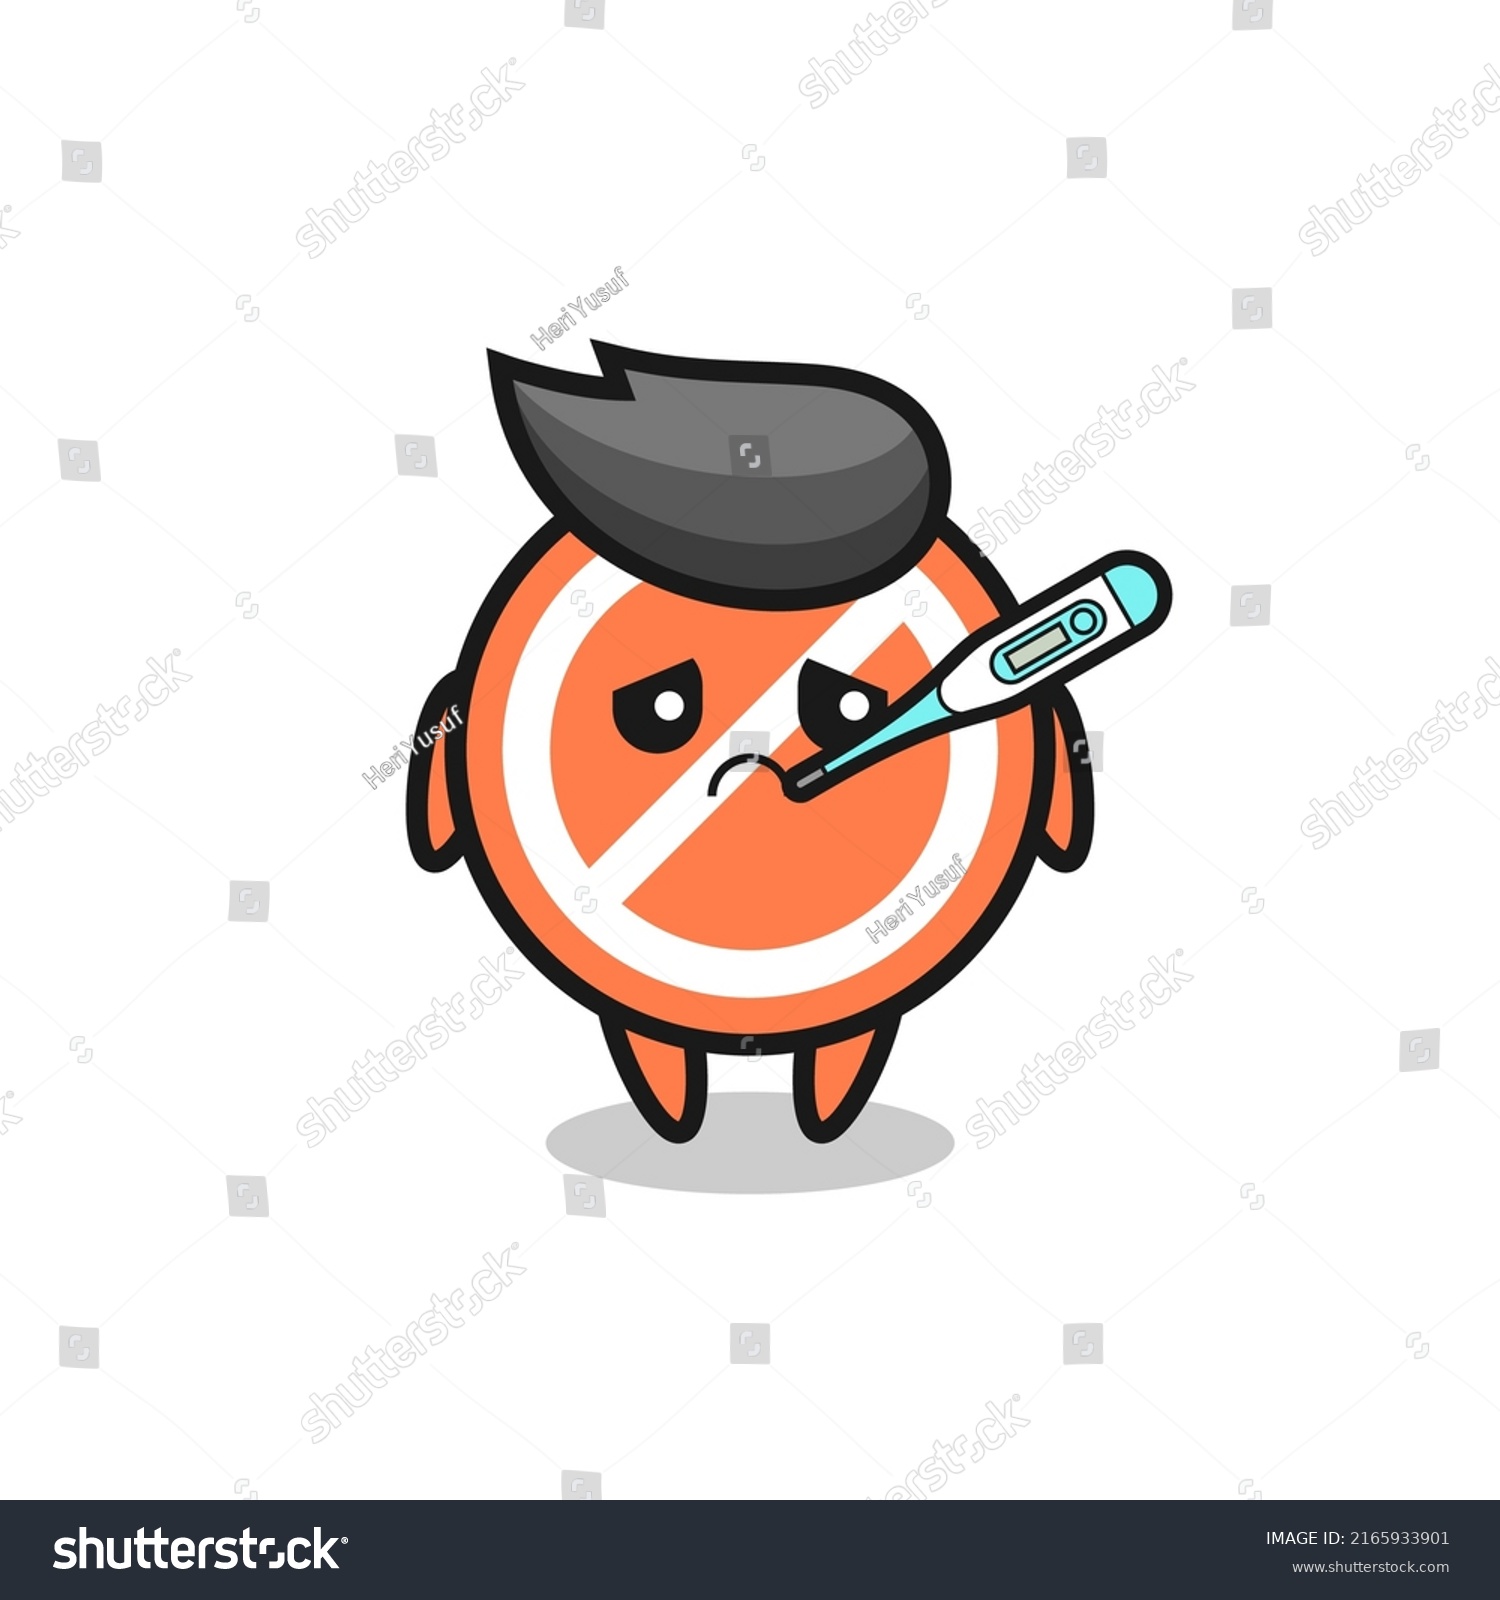 SVG of stop sign mascot character with fever condition , cute style design for t shirt, sticker, logo element svg